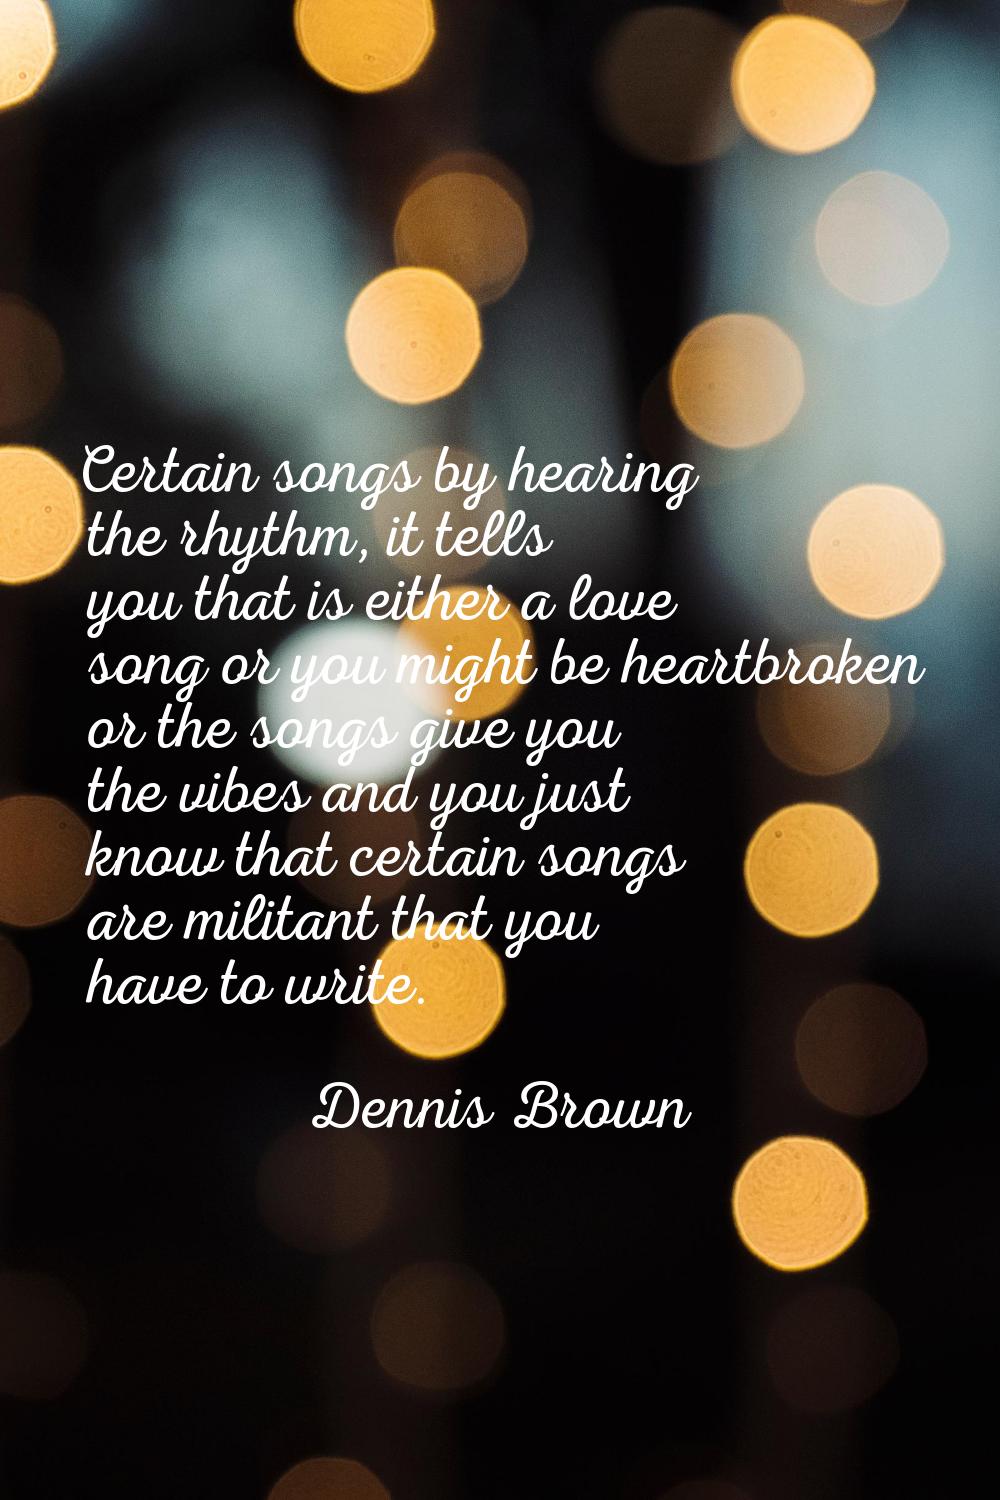 Certain songs by hearing the rhythm, it tells you that is either a love song or you might be heartb